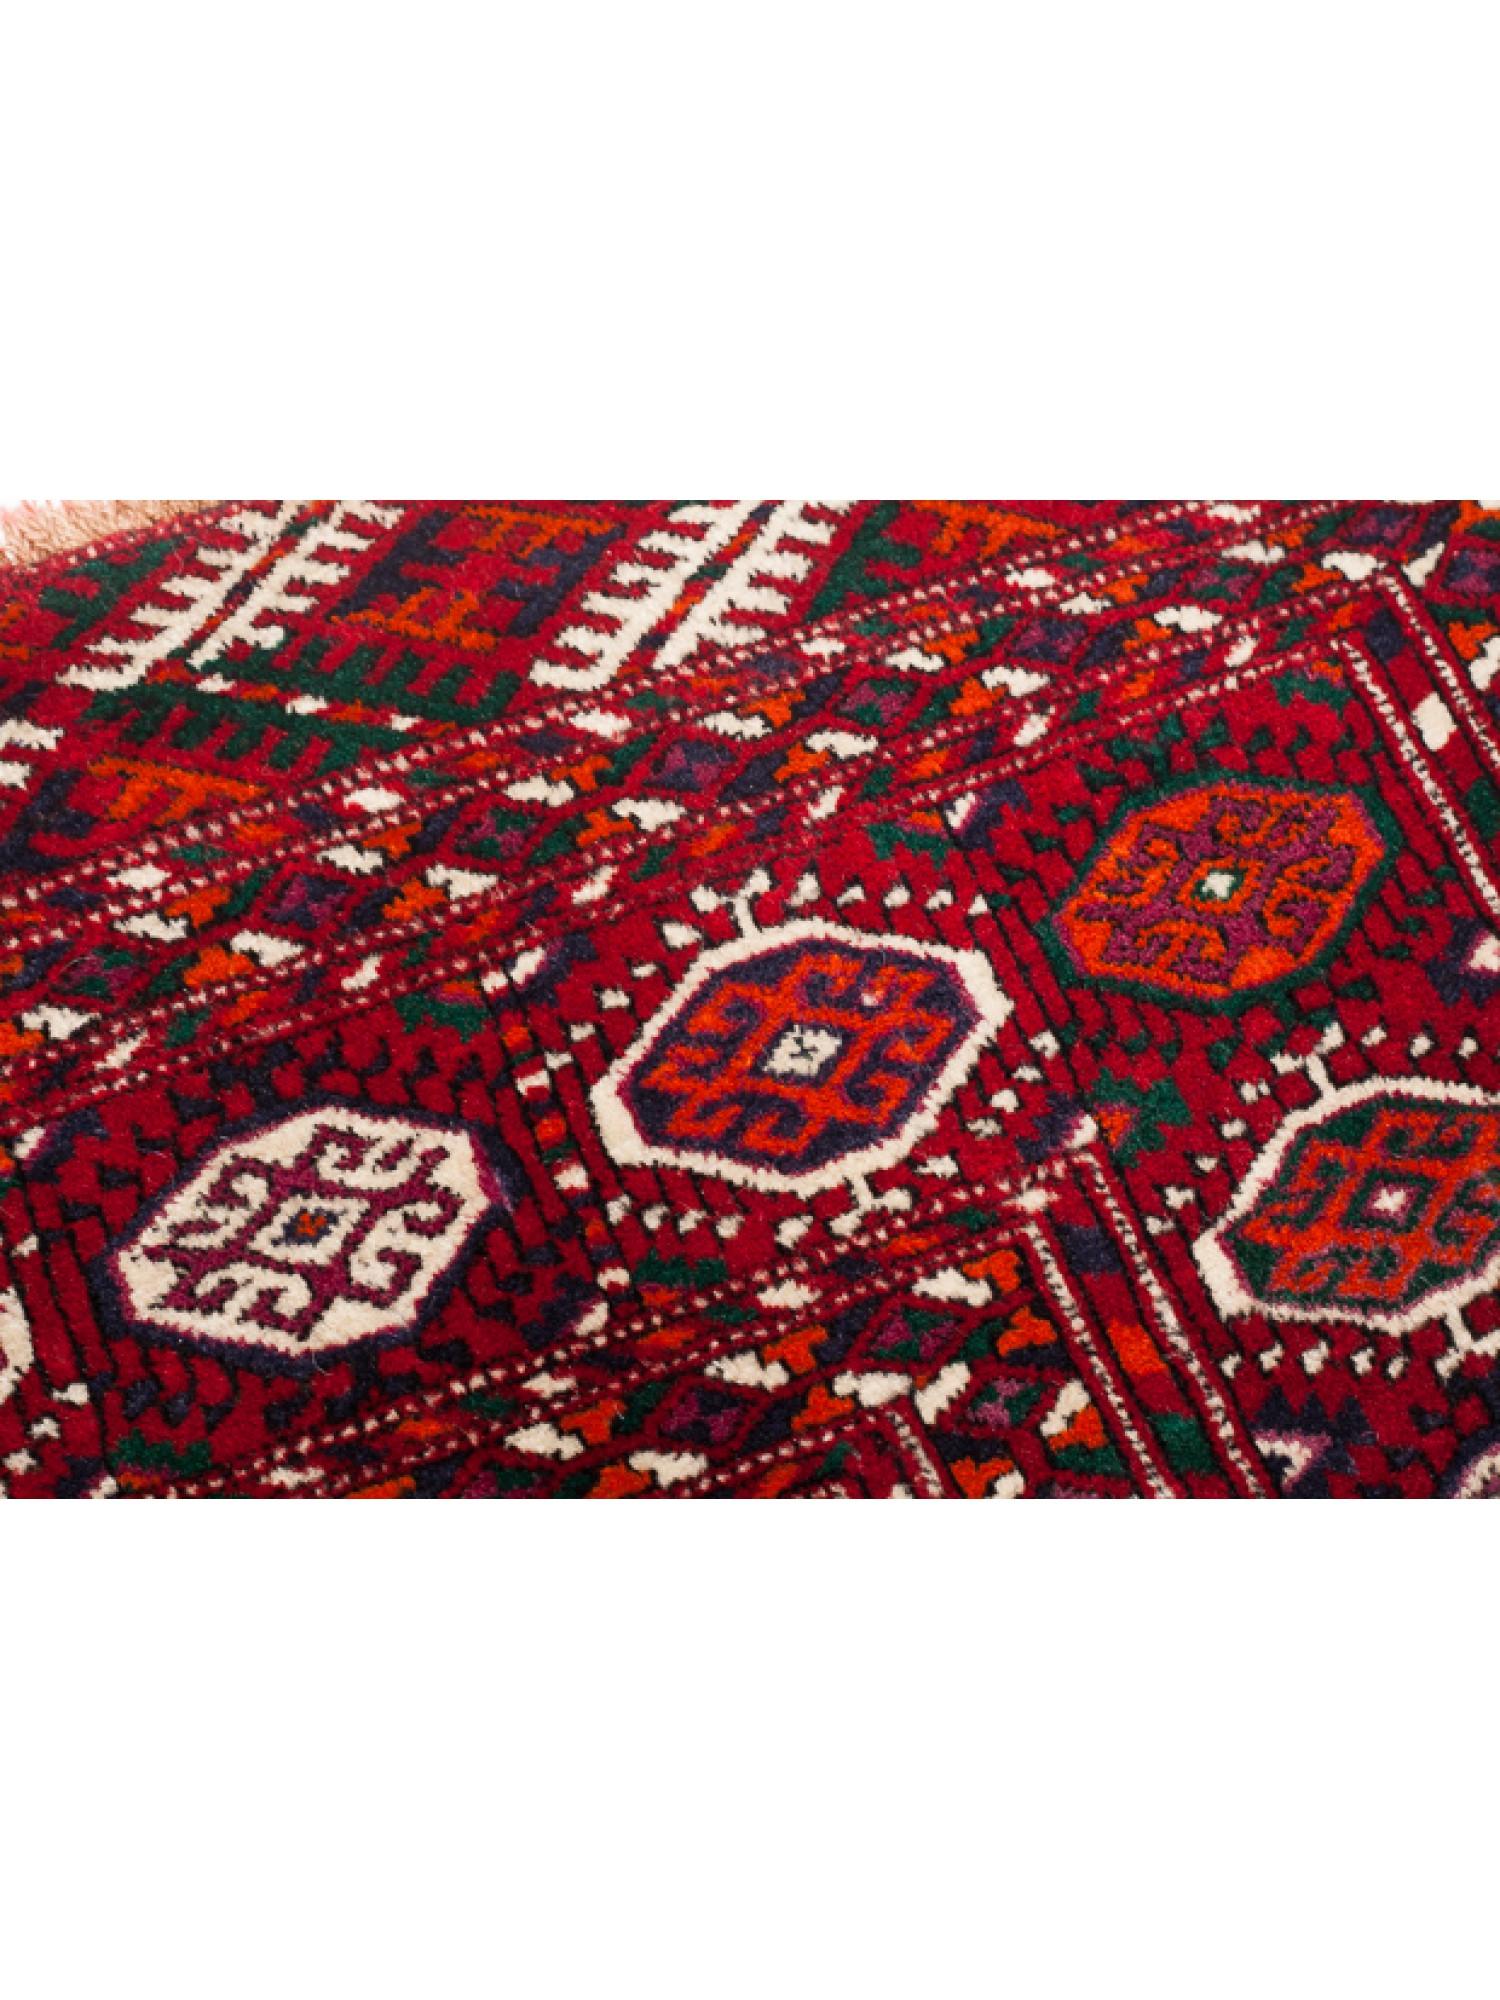 This is a Central Asian Old Tekke Bukhara Turkmen Carpet from the Turkmenistan Bukhara region with a rare and beautiful color composition.

Bukhara carpet (Turkmen Rug, Bokhara, Buhara, Bukhara) is the name of a tribal rug woven by the Turkmen